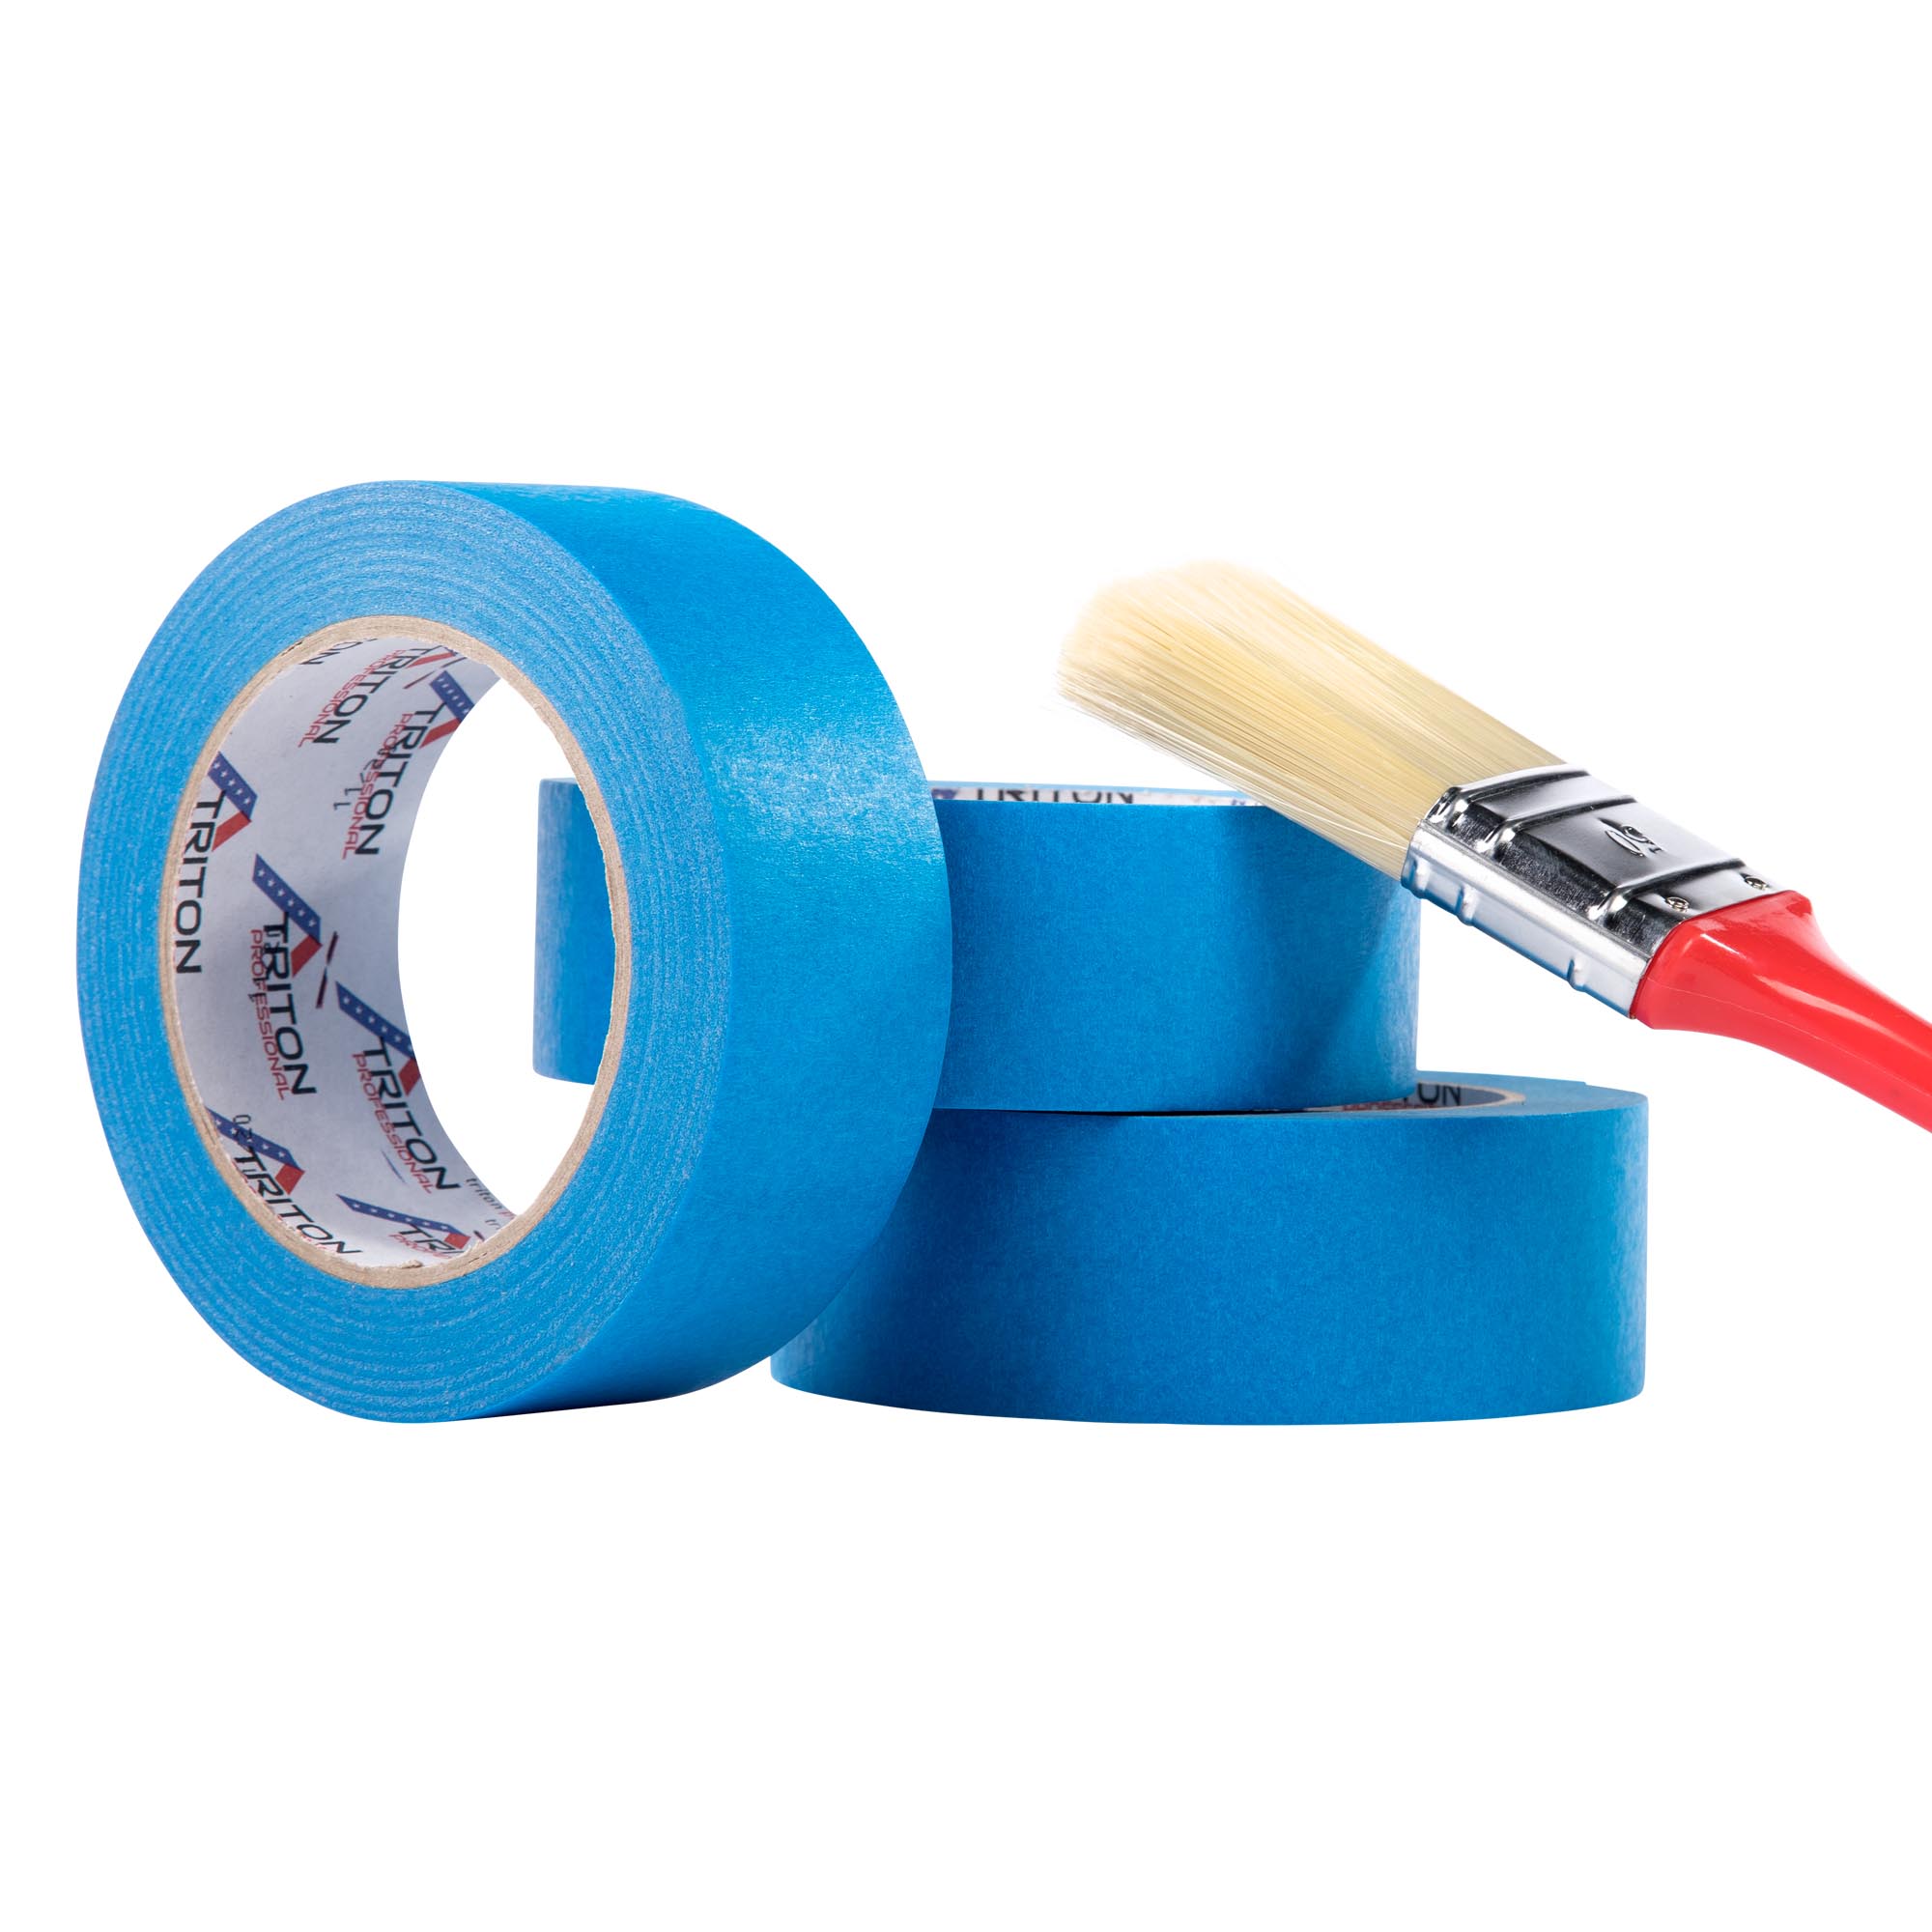 3M Scotch Blue Painters Masking Tape professional 50m Easy Removal